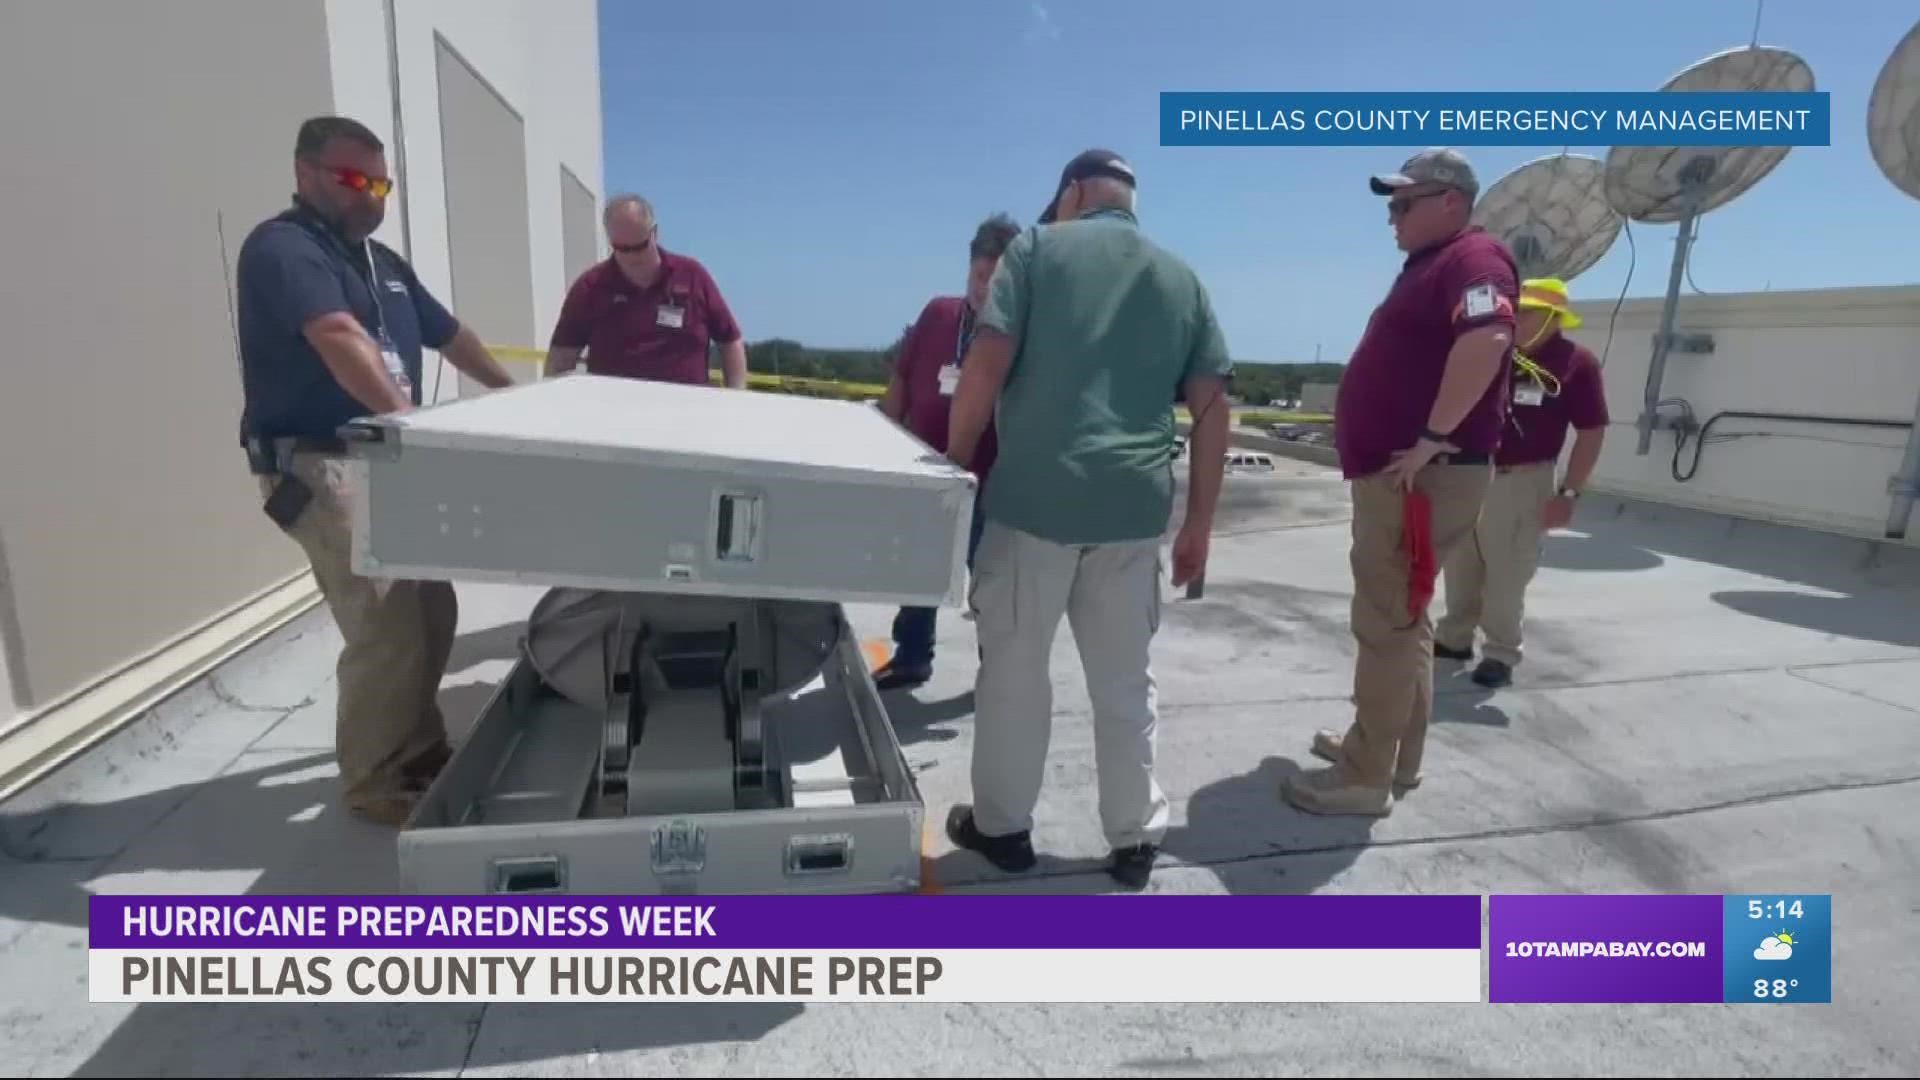 It's hurricane preparedness week. Pinellas County is working through a hurricane simulation exercise to test its response.